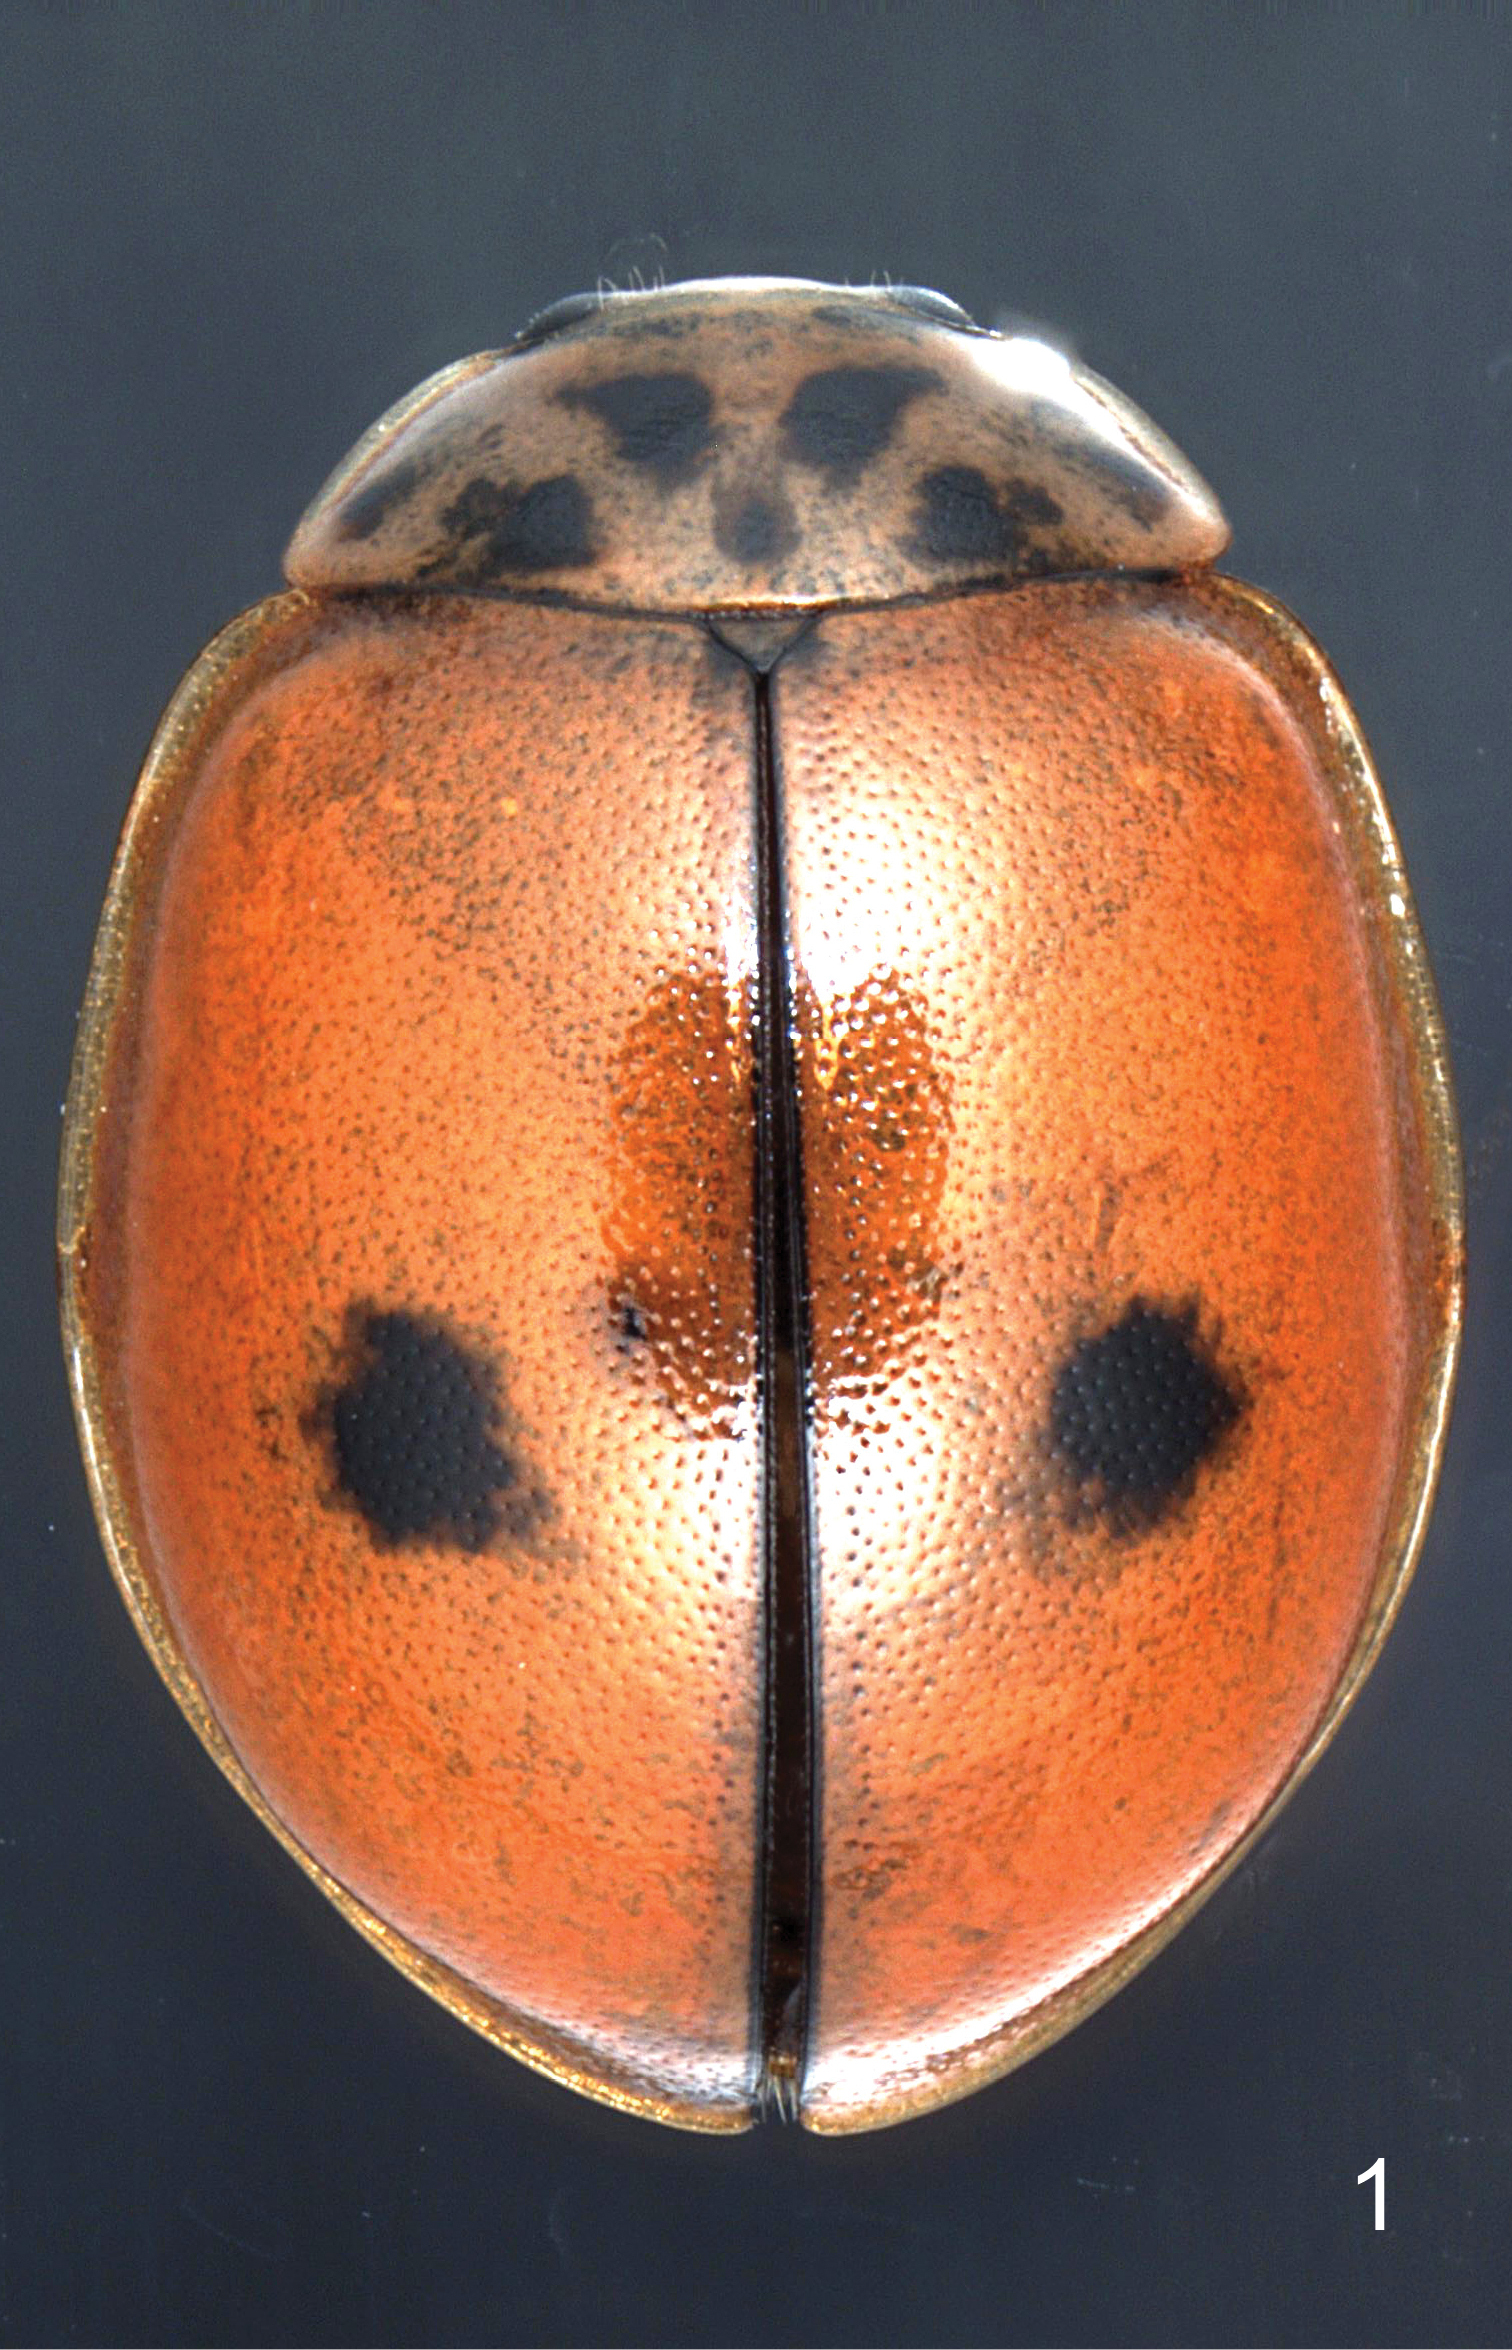 oenopia-shirkuhensis-sp-nov-coleoptera-coccinellidae-from-iran